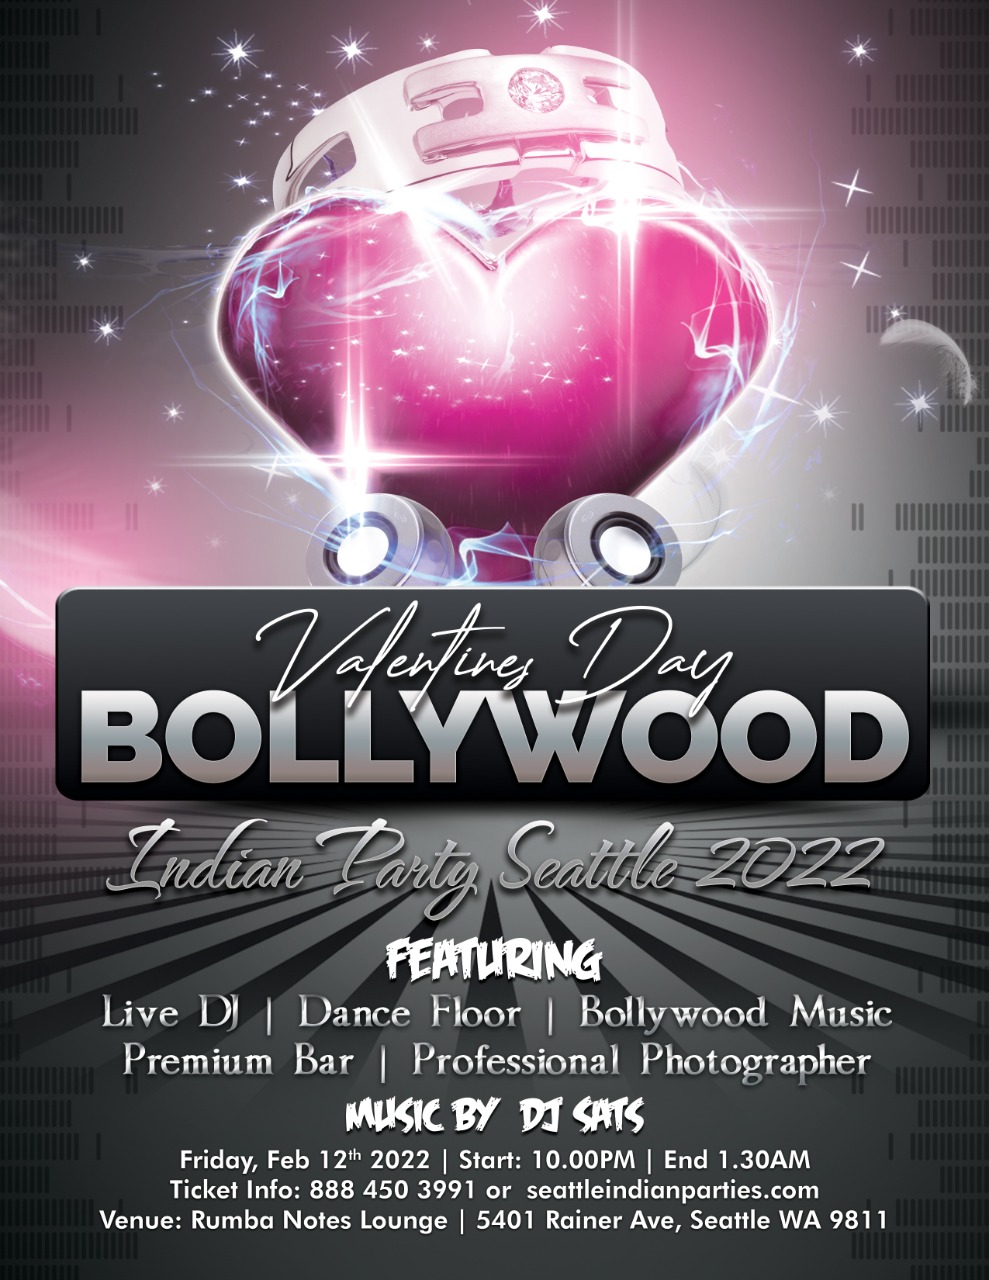 Valentine’s Day Bollywood Indian Party Seattle 2022